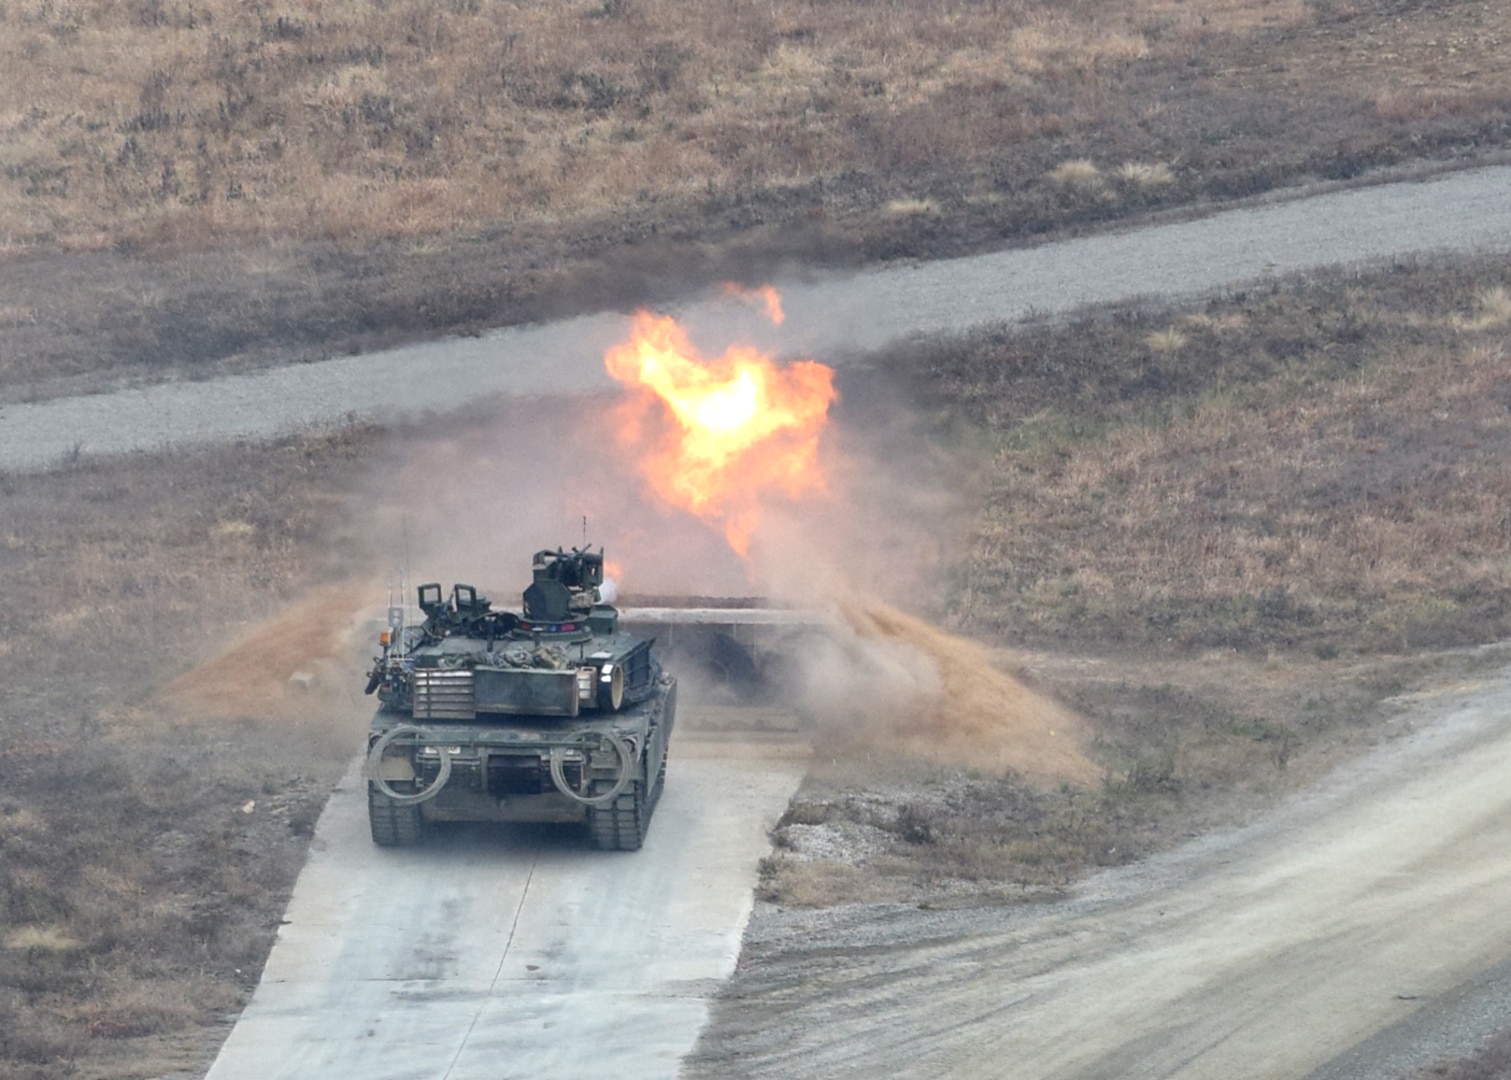 POCHEON, Republic of Korea -- An M1A2 Abrams tank from 2nd Battalion, 34th Armor Regiment, 1st Armored Brigade Combat Team, 1st Infantry Division, fires its main weapons system during a live-fire training exercise at the Rodriguez Live Fire Complex Nov. 30. The battalion conducted the large-scale, life-fire exercise as part of a 30-day rotation to the RLFC in order to remain qualified on their main weapons systems and be ready to "Fight Tonight" in support of the 2nd Inf. Div. / ROK-U.S. Combined Division. (U.S. Army Photo by Capt. Jonathan Camire, 1st ABCT Public Affairs/Released)